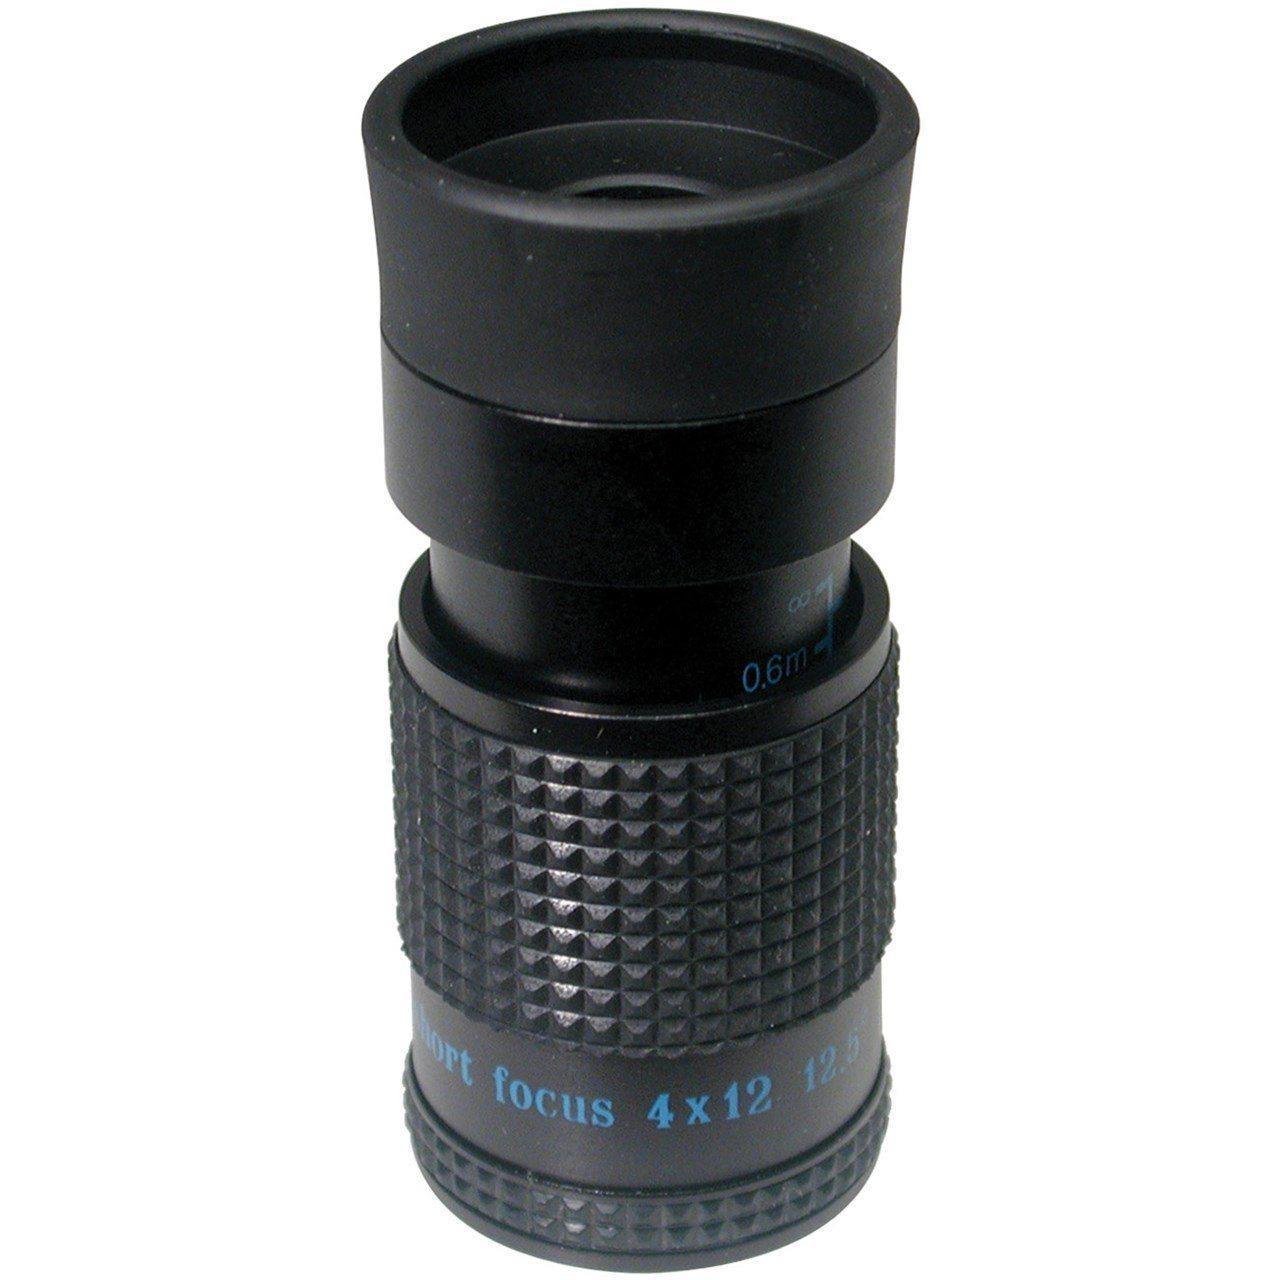 Monocular 4 x 12 - The Low Vision Store